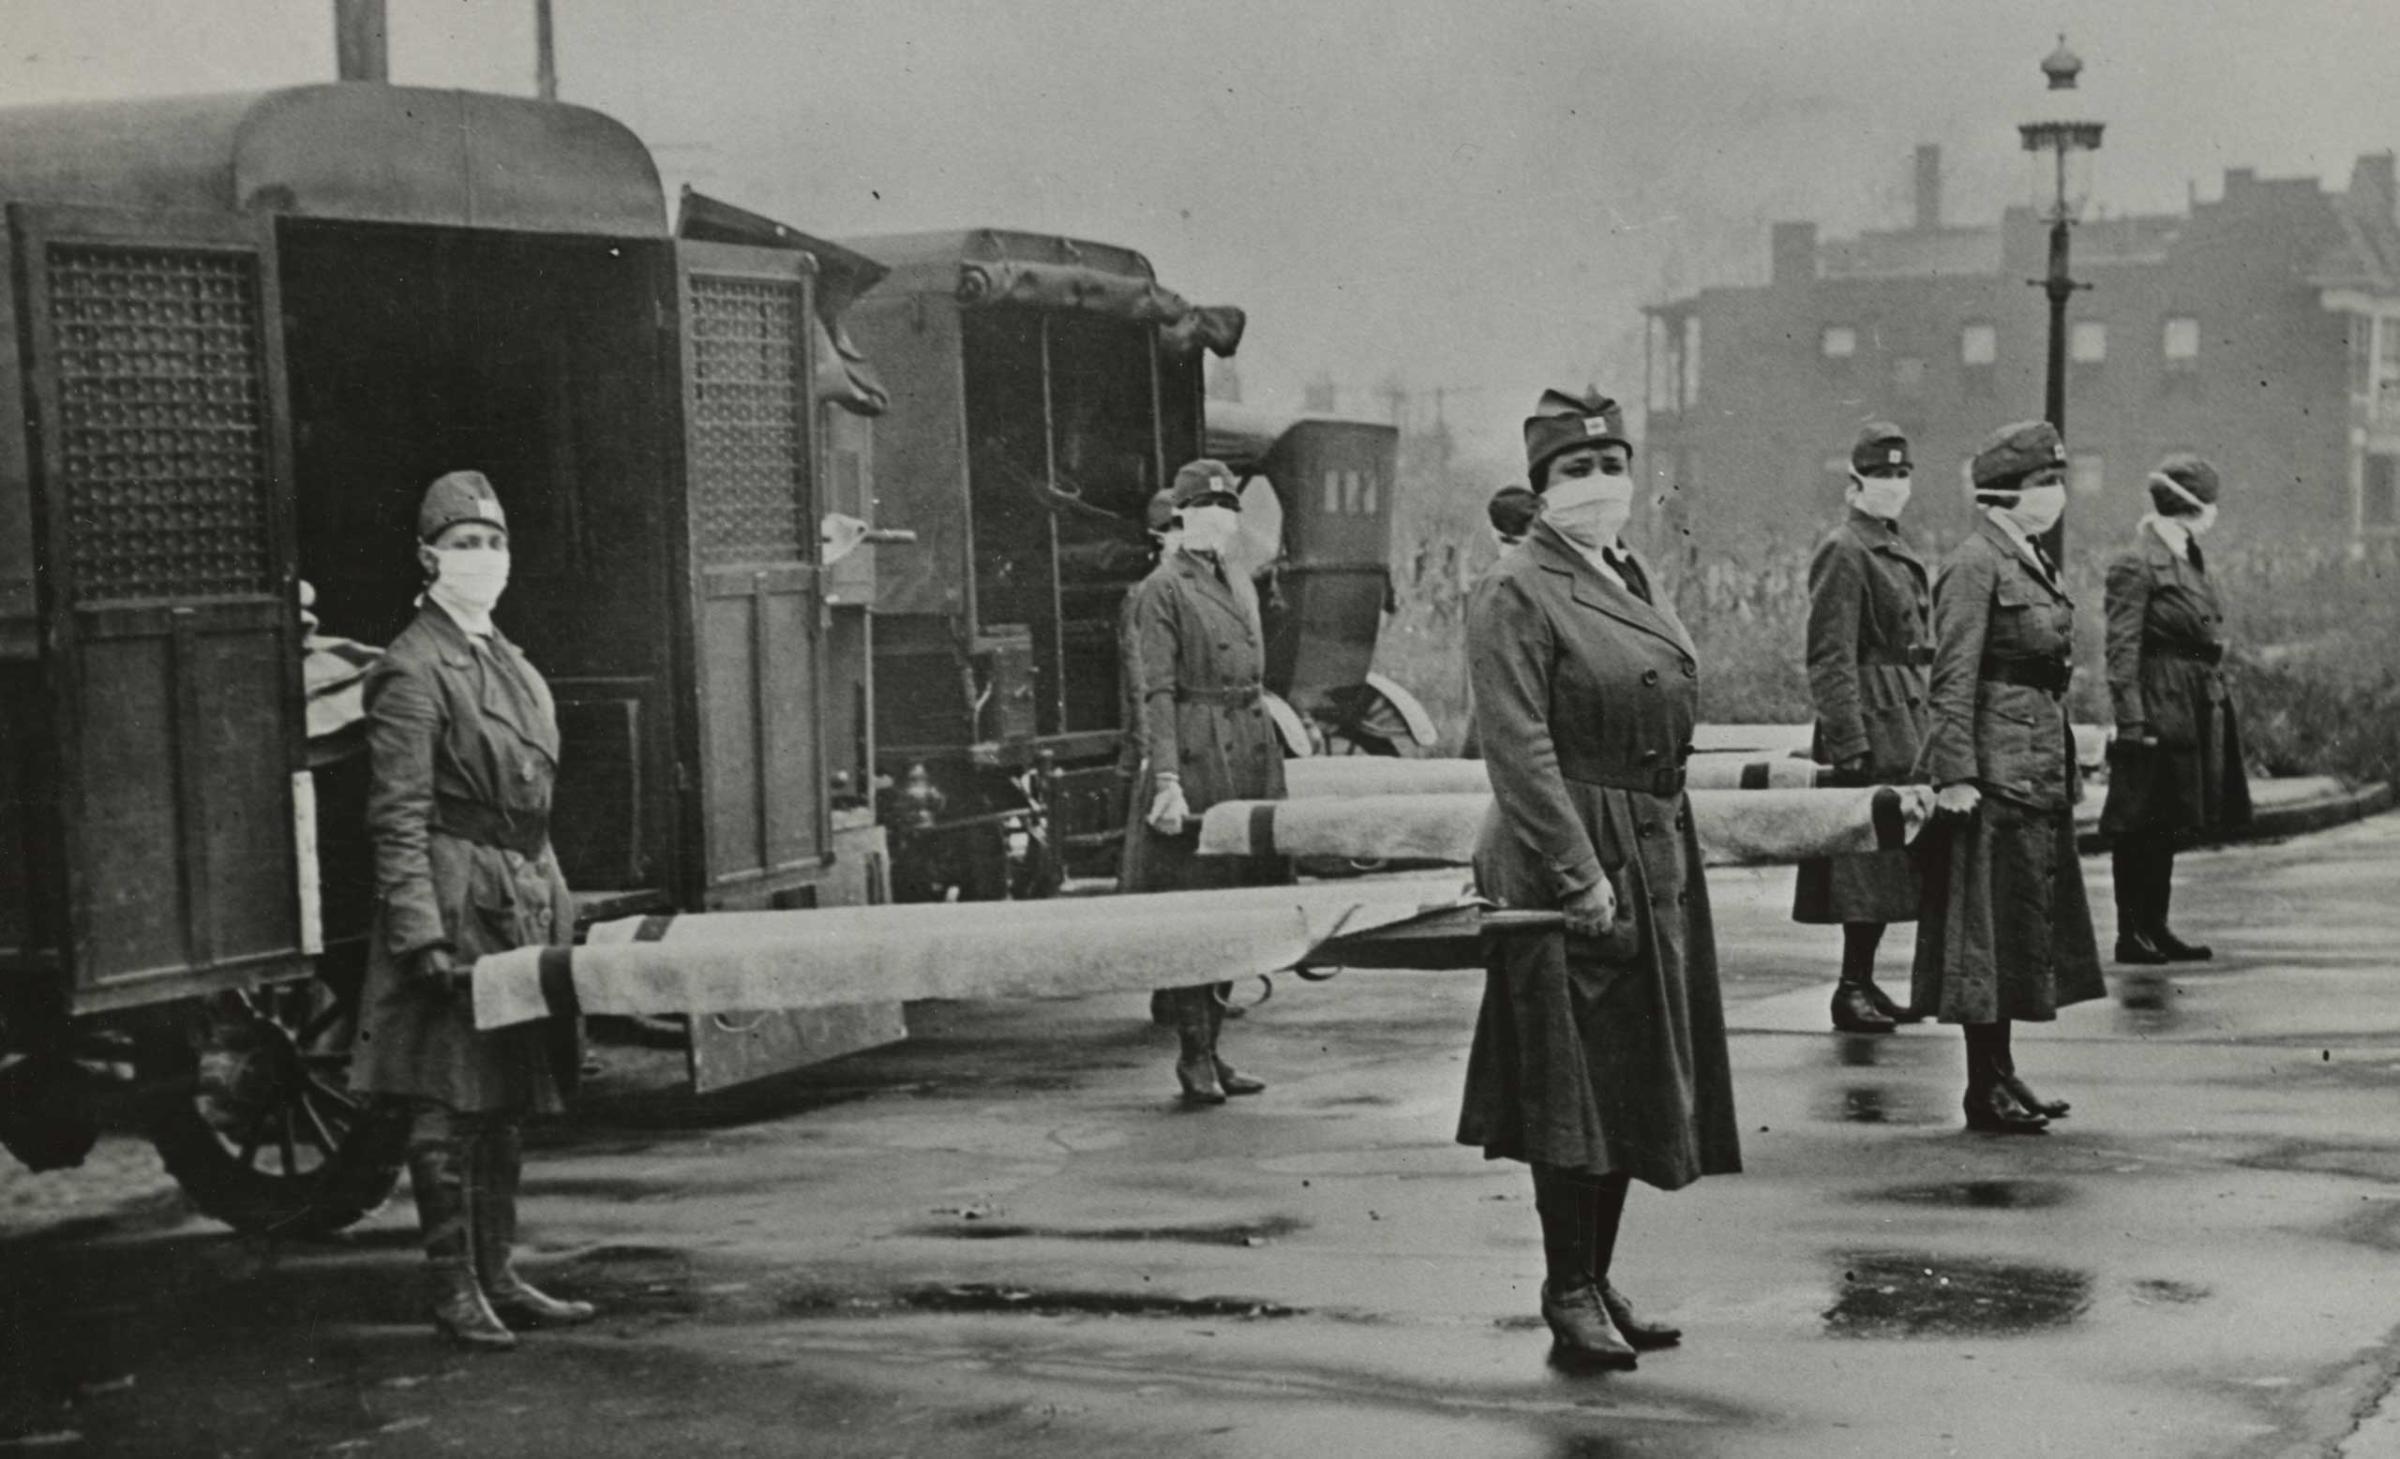 St. Louis Red Cross Motor Corps on duty during the influenza pandemic, 1918.